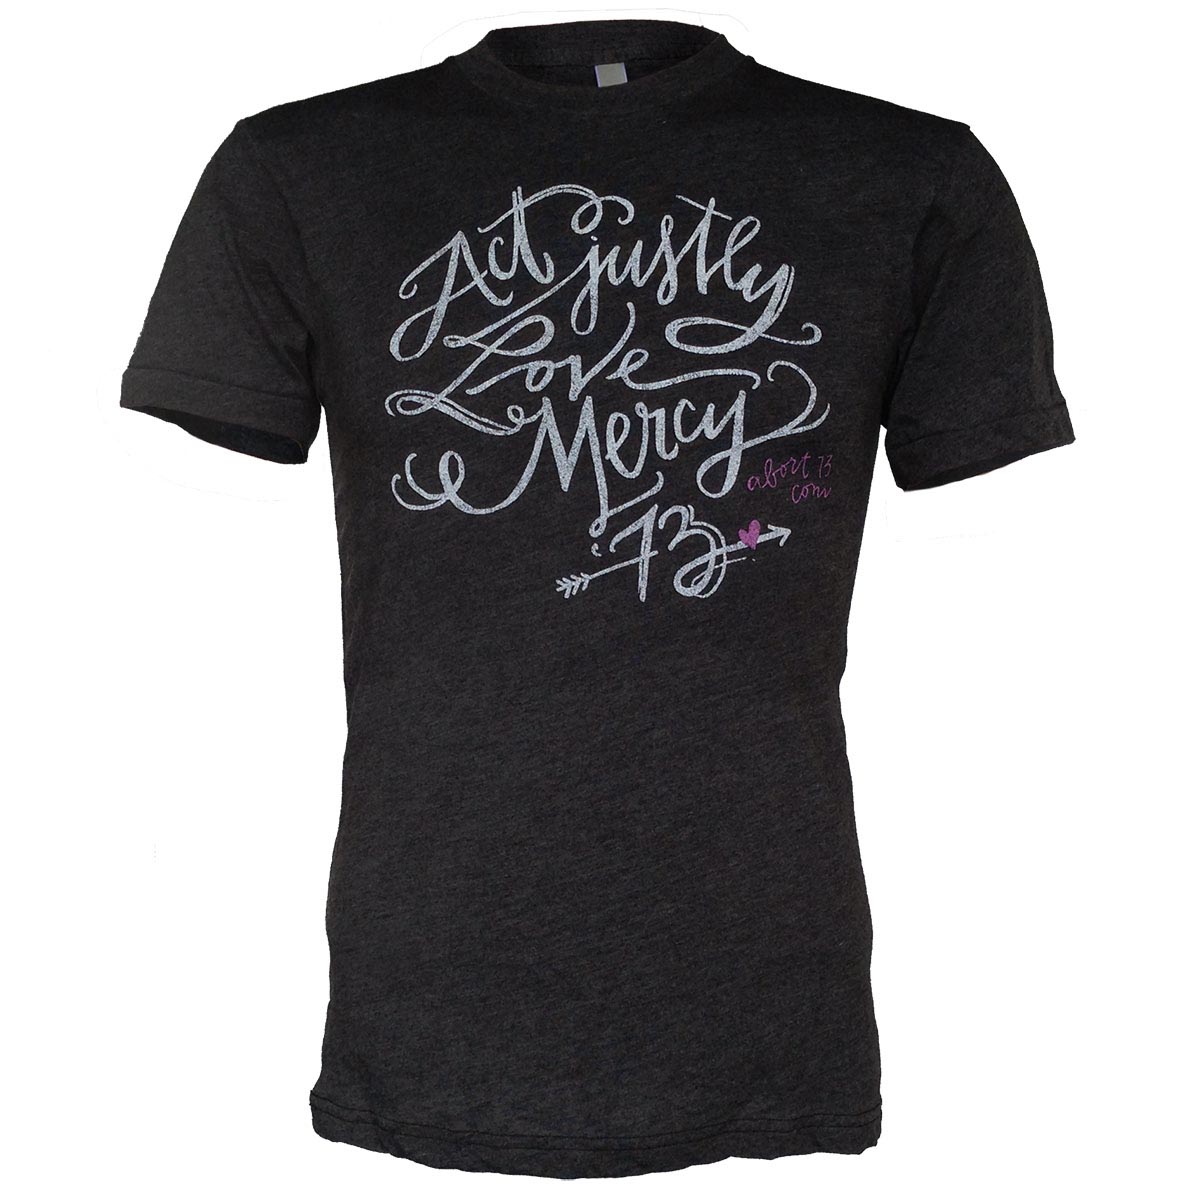 Act Justly. Love Mercy. (Abort73 Unisex Tri-Blend T-shirt 6010)